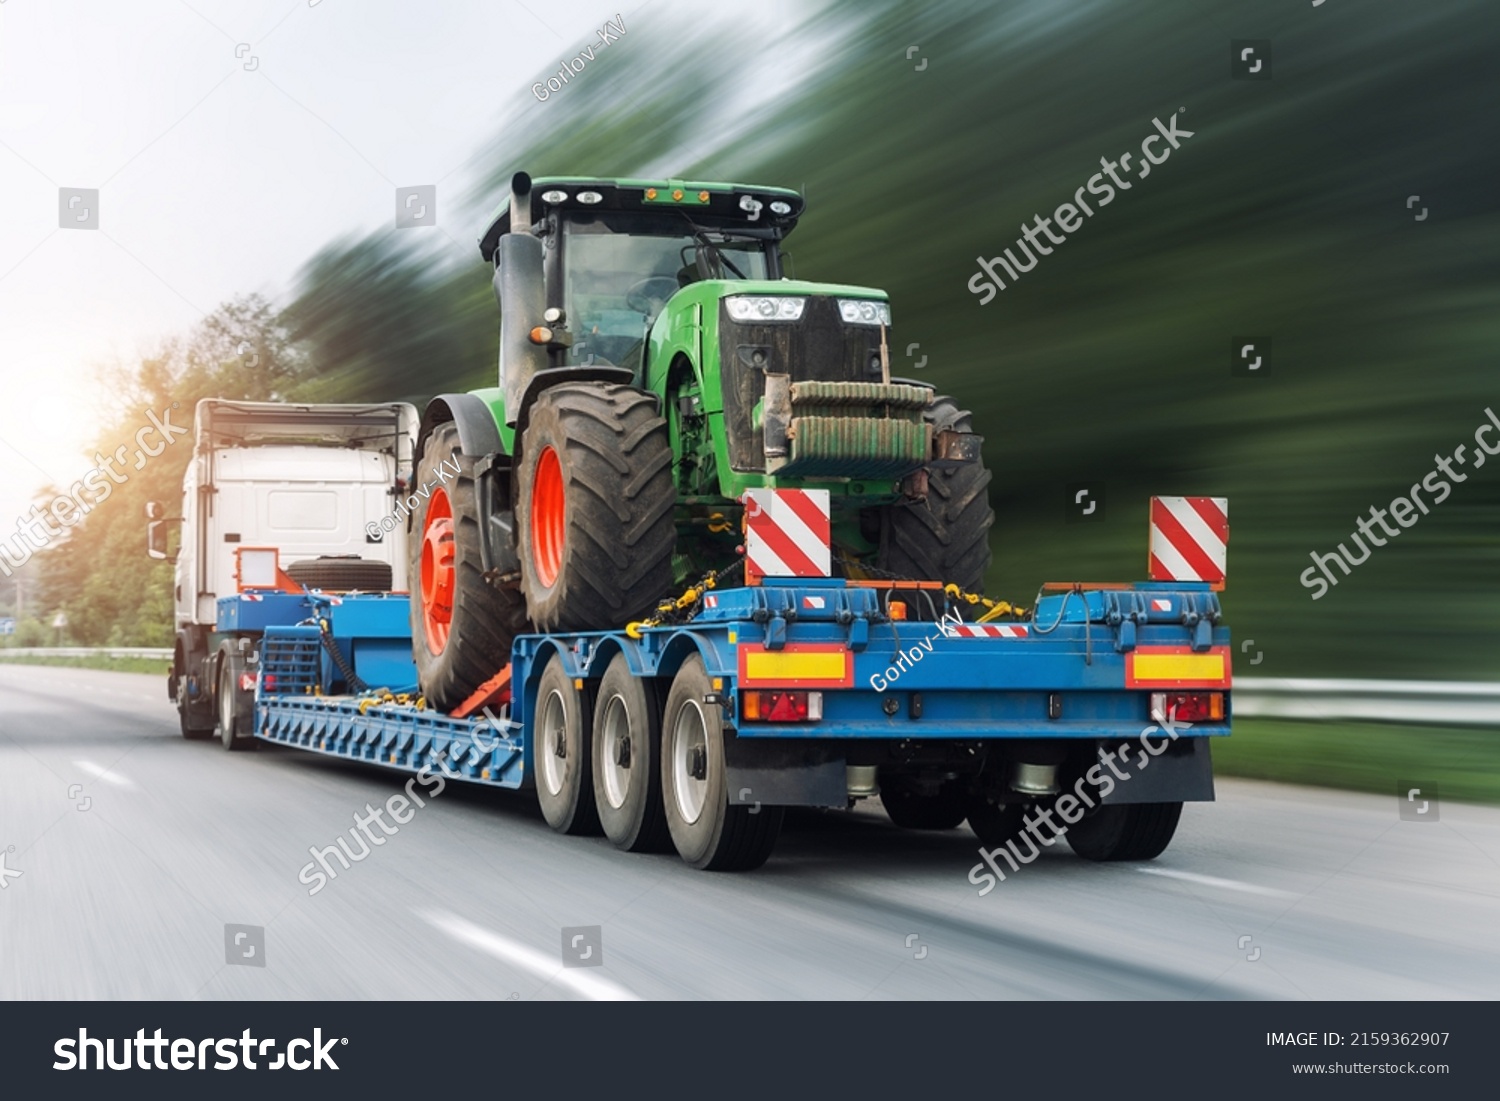 POV heavy industrial truck semi trailer flatbed platform transport one big modern farming tractor machine on common highway road at bright day sky. Agricultural equipment transportation service work #2159362907